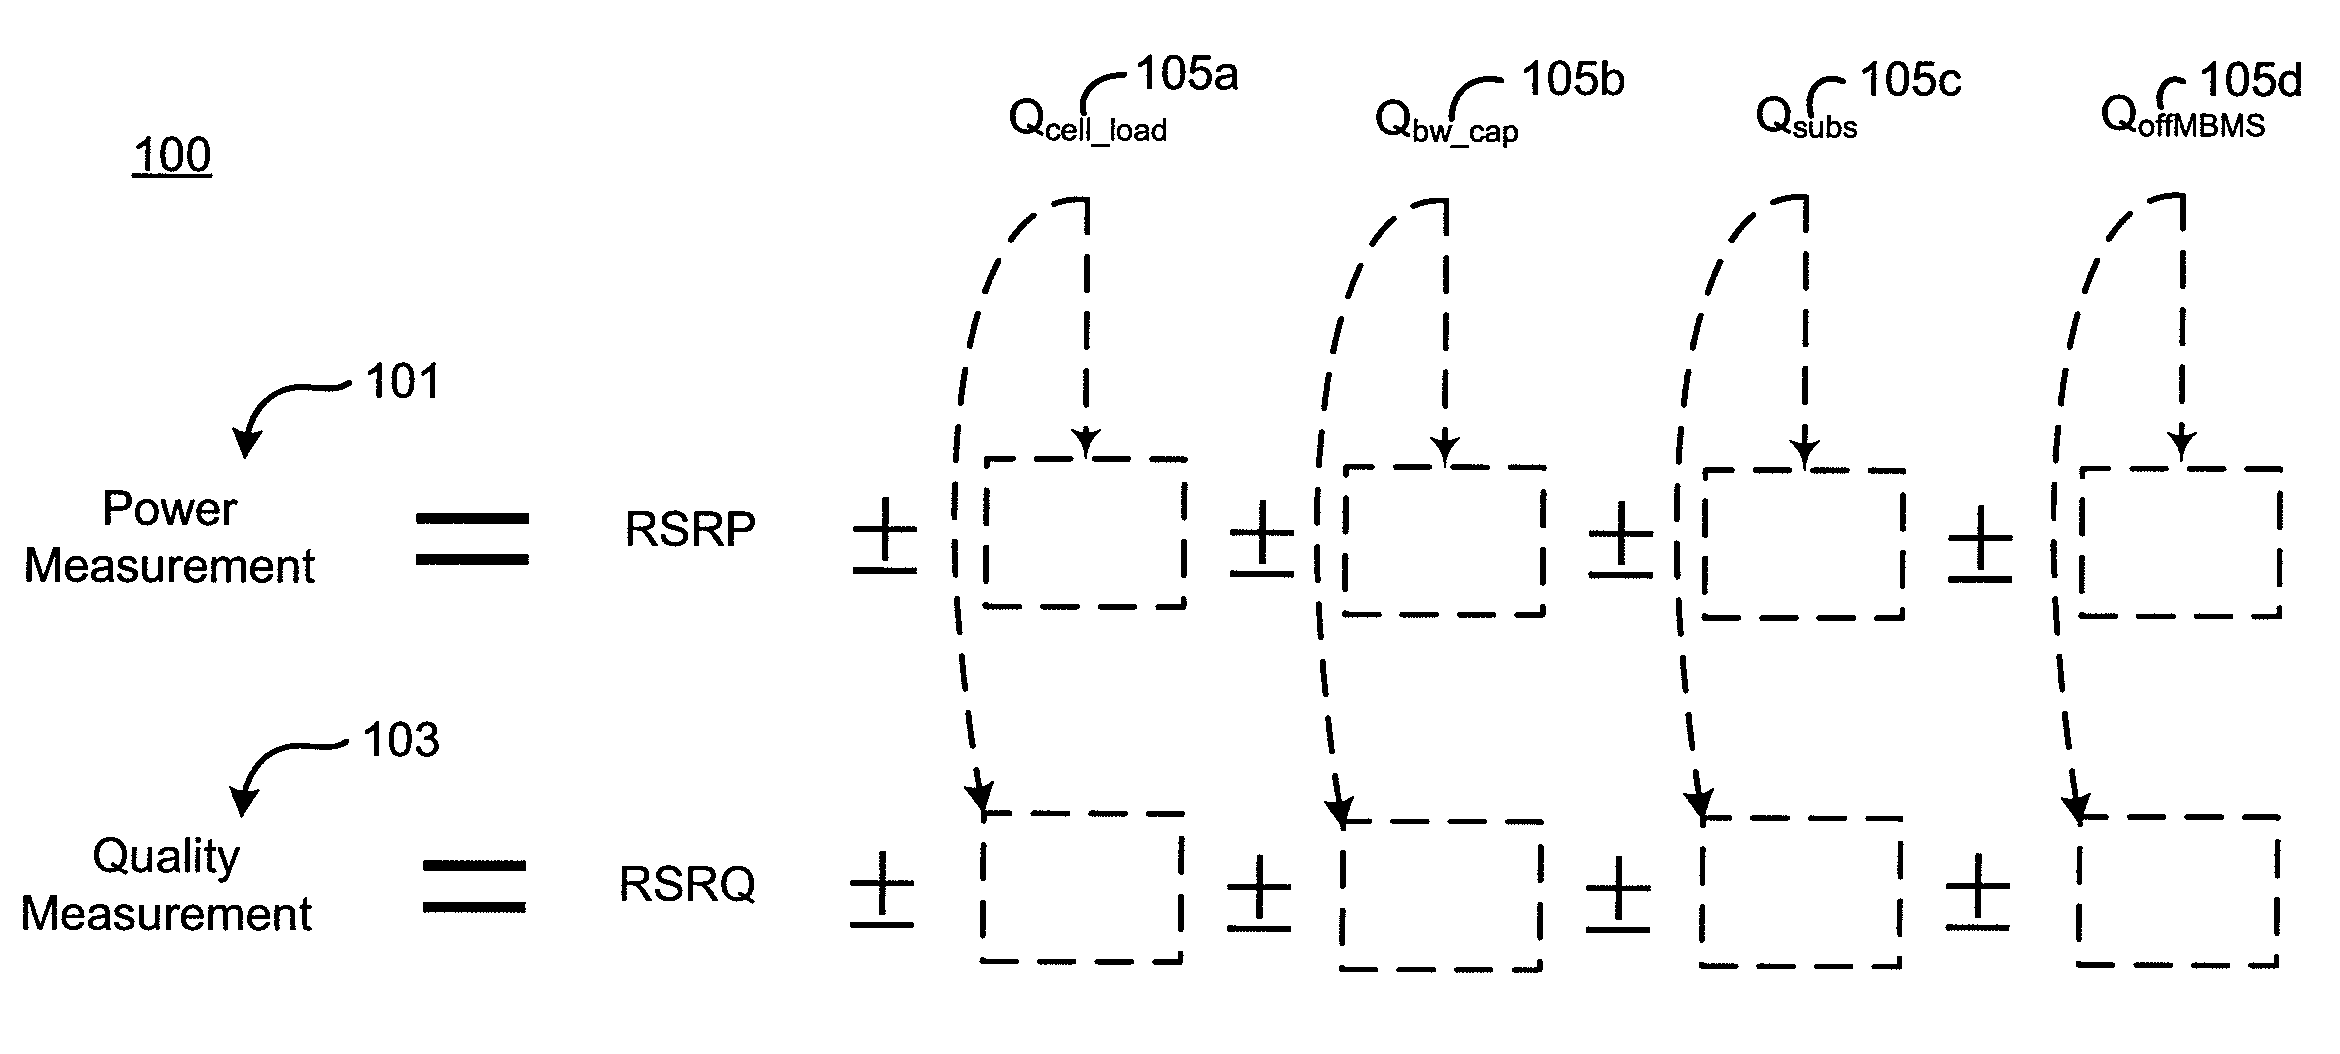 Cell reselection process for wireless communications